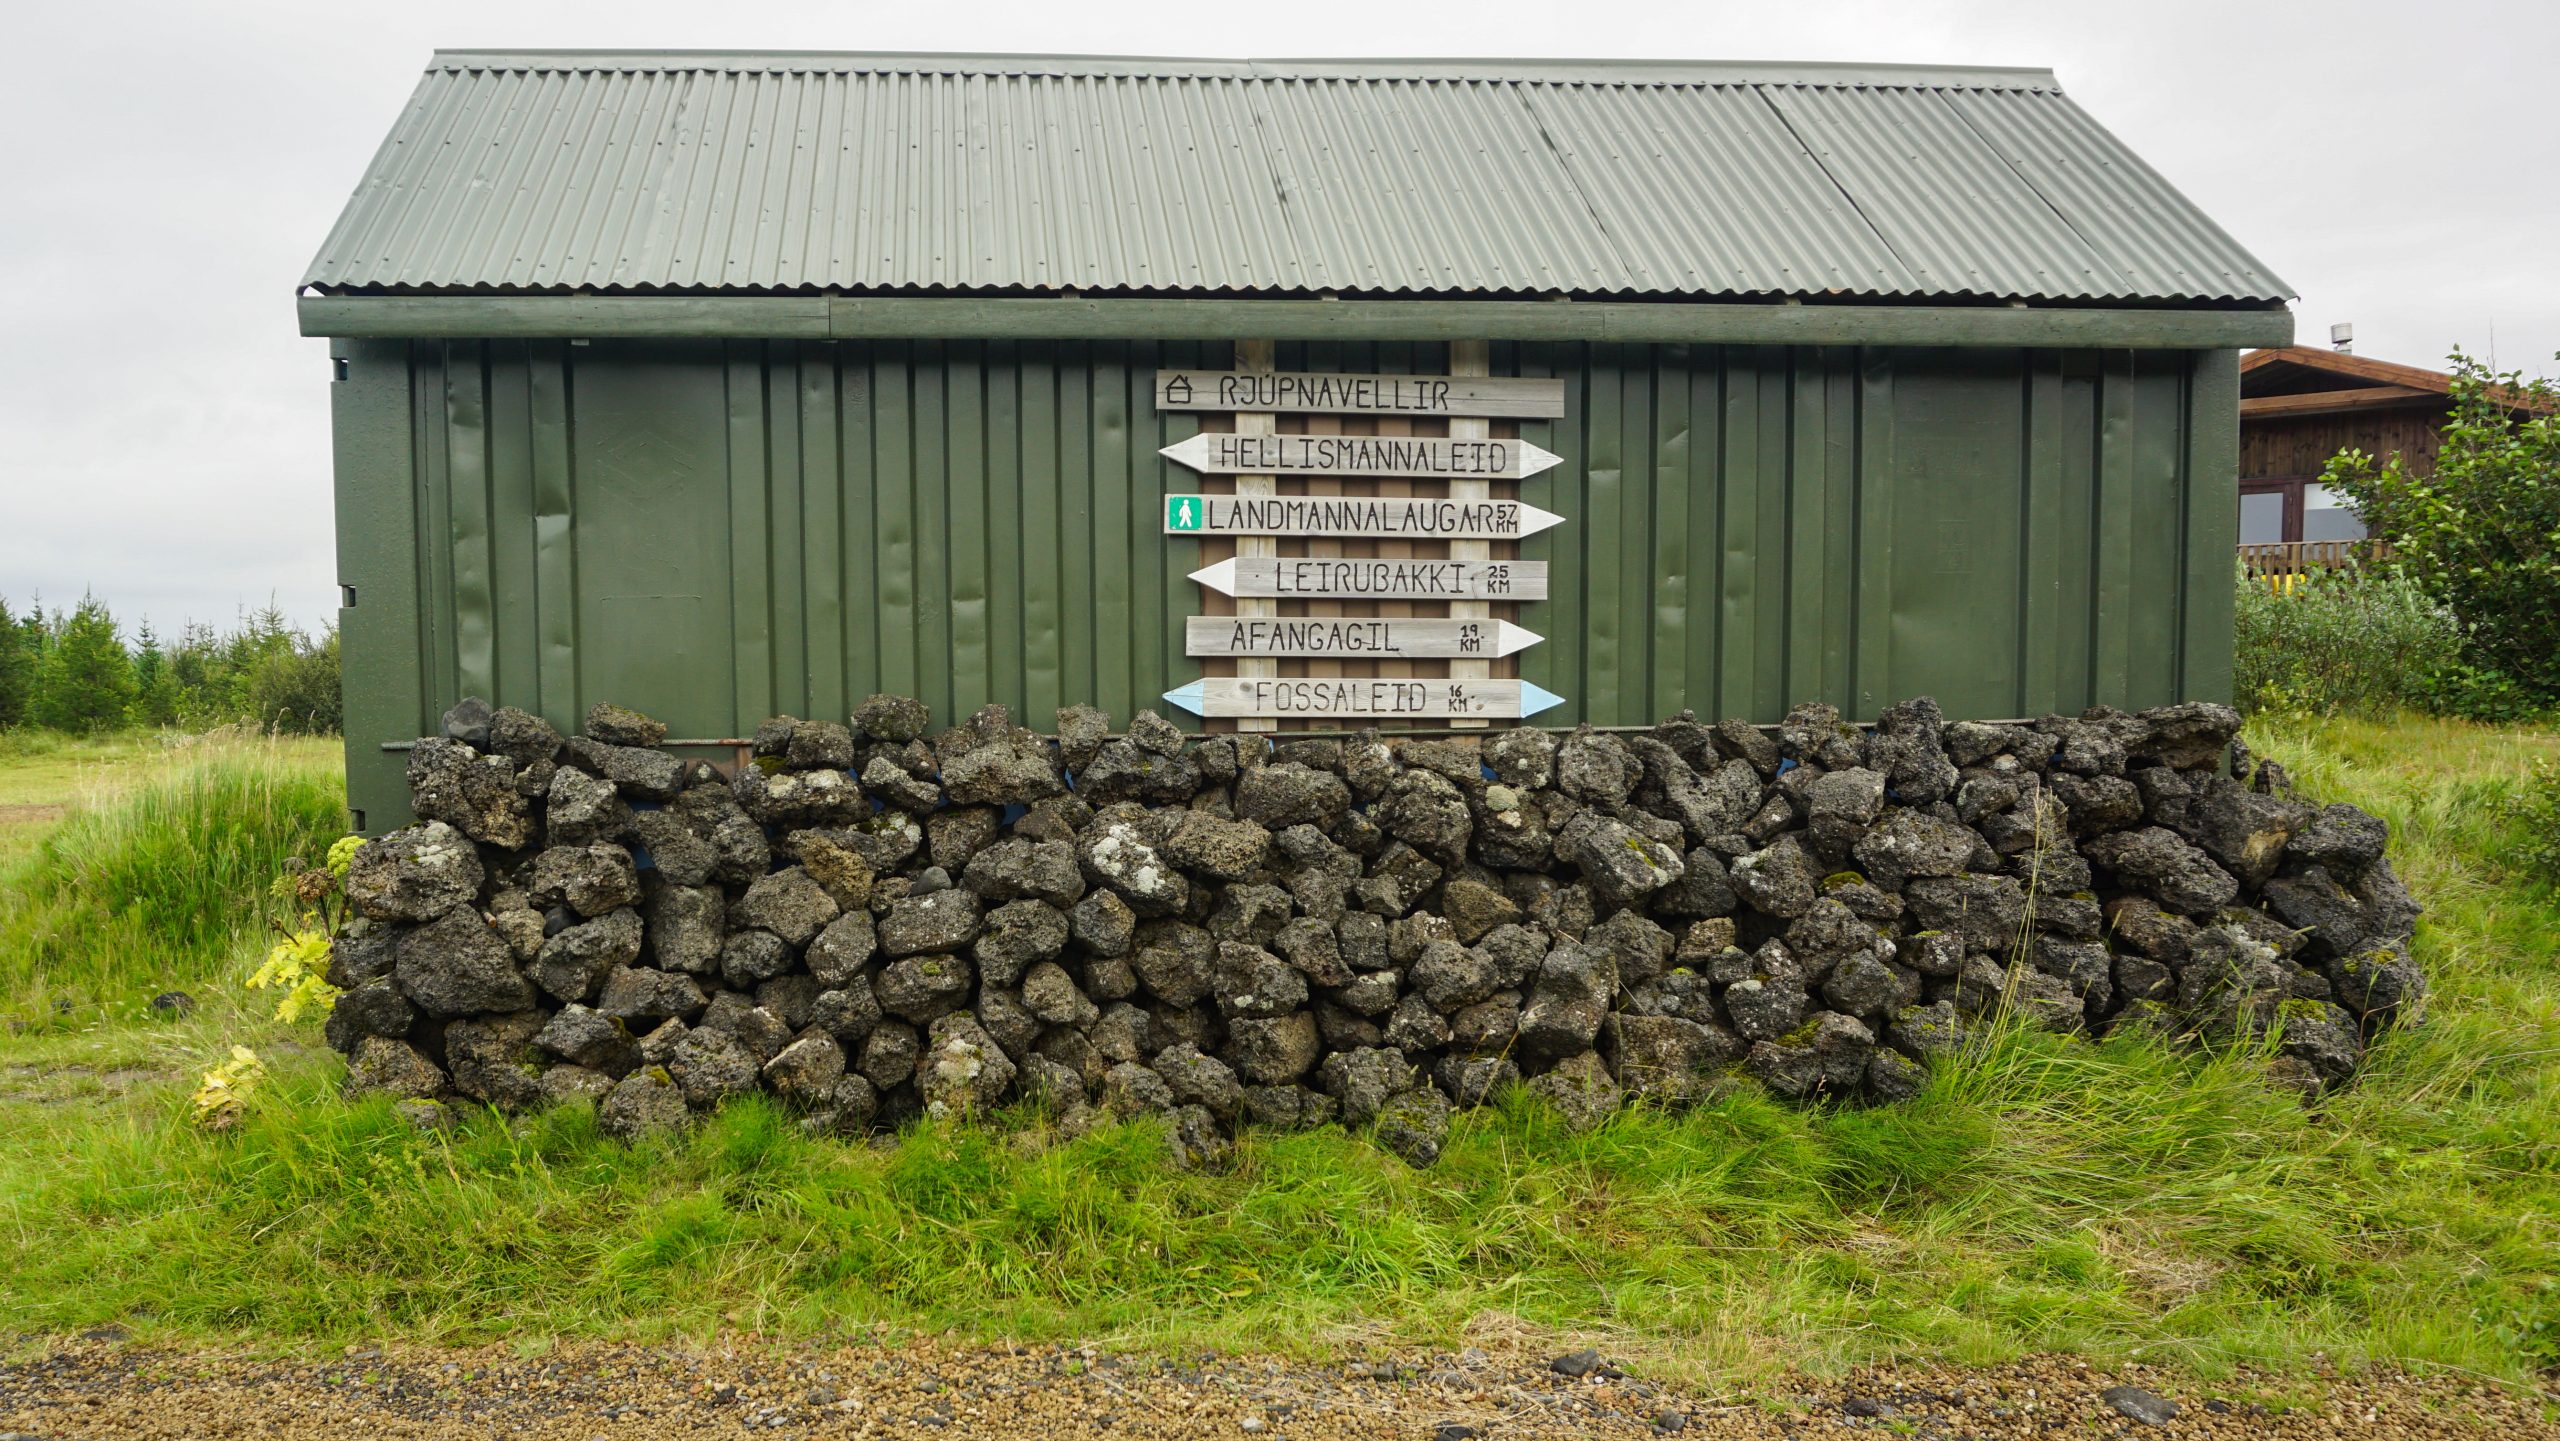 A green hut with a sign for directions of different routes in the area